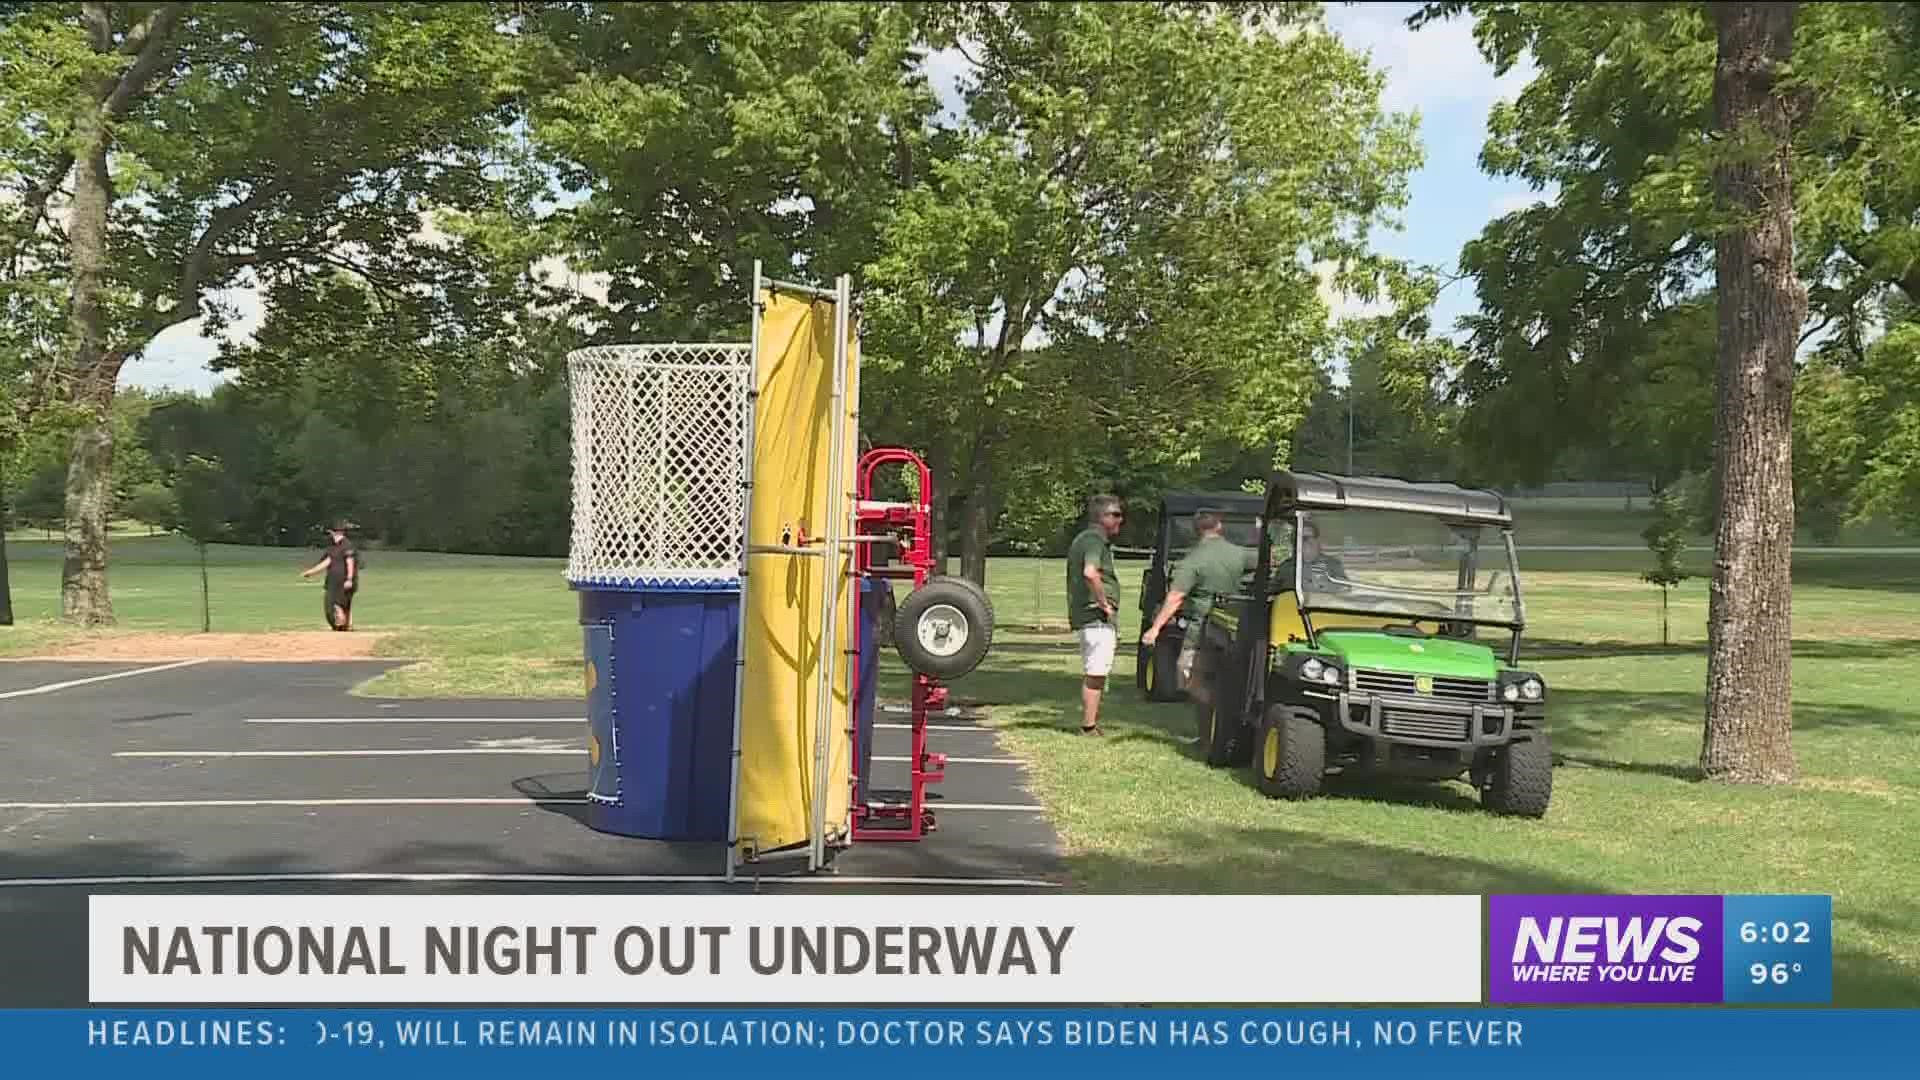 Police departments across Northwest Arkansas held their National Night Out events for the officers and community to enhance their relationships.